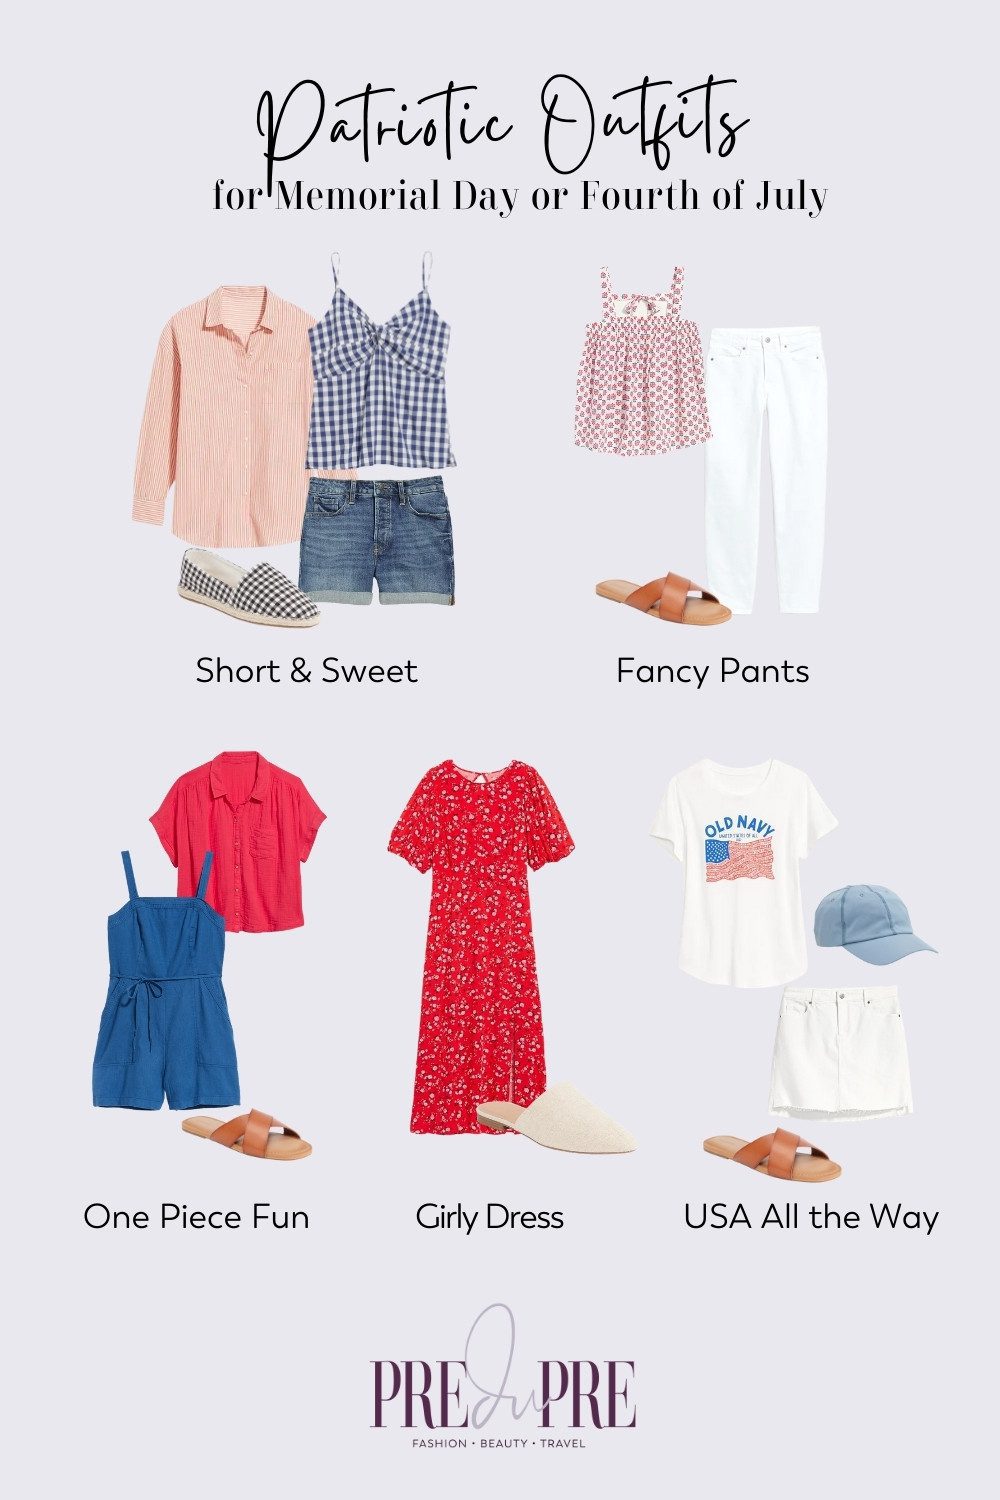 Collage of patriotic outfit ideas for Memorial Day and/or Independence Day on Fourth of July